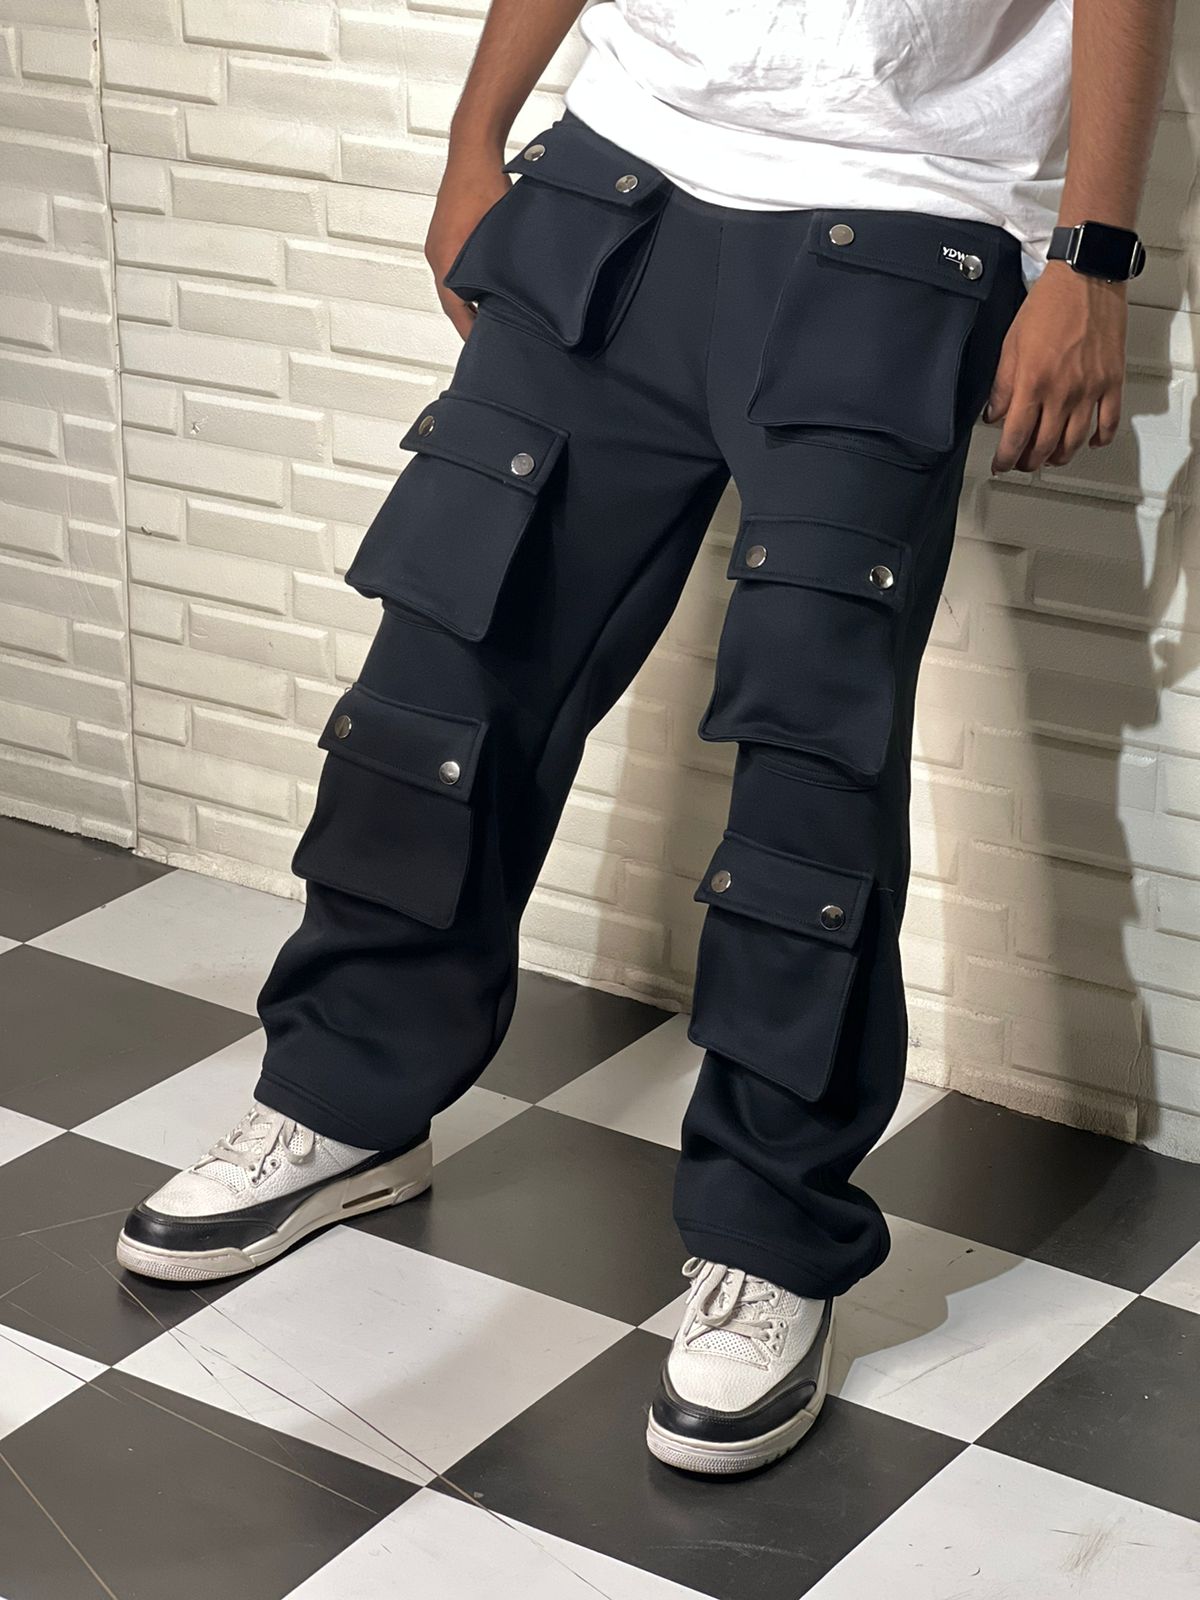 Our Men's Travel Pants Stand Up to Every Test | Bluffworks